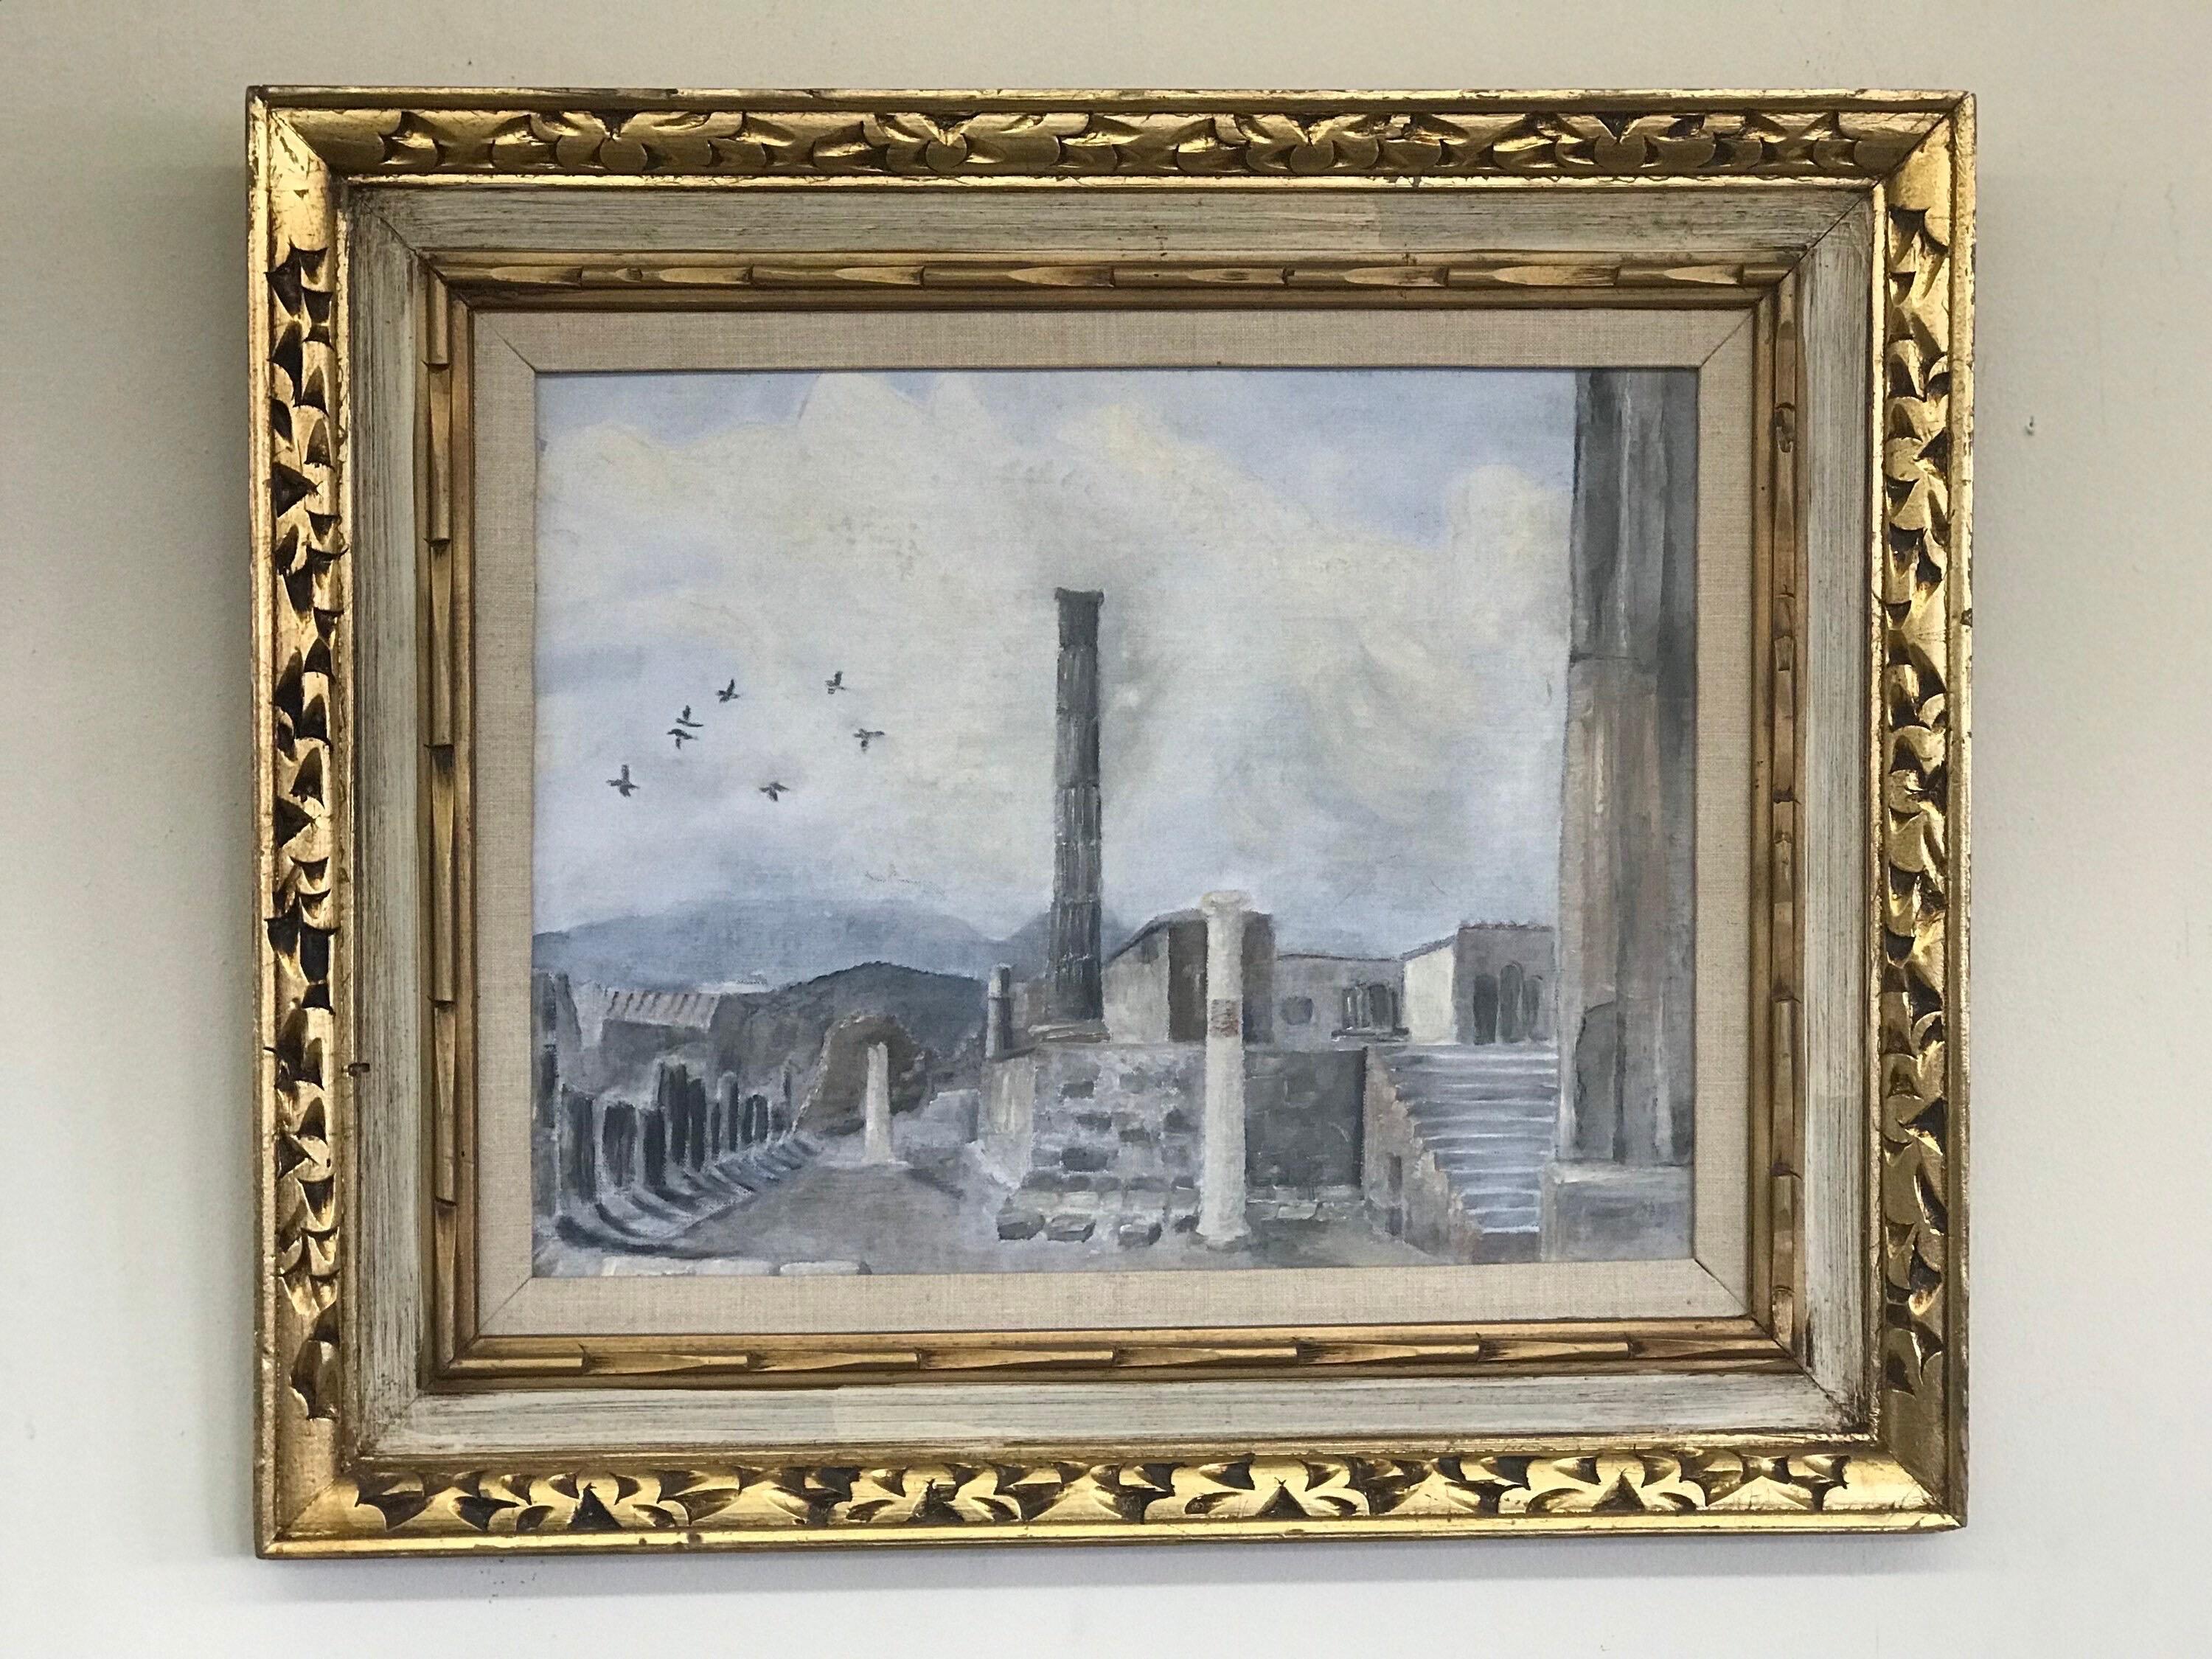 Vintage Art Deco Scenic Oil Painting Architectural Buildings Blue Bright Birds animal Professional Framed

Dimensions. Overall 25 1/2 W ; 21 1/2 H ; Actual Art 17 1/2 W ; 13 1/2 H